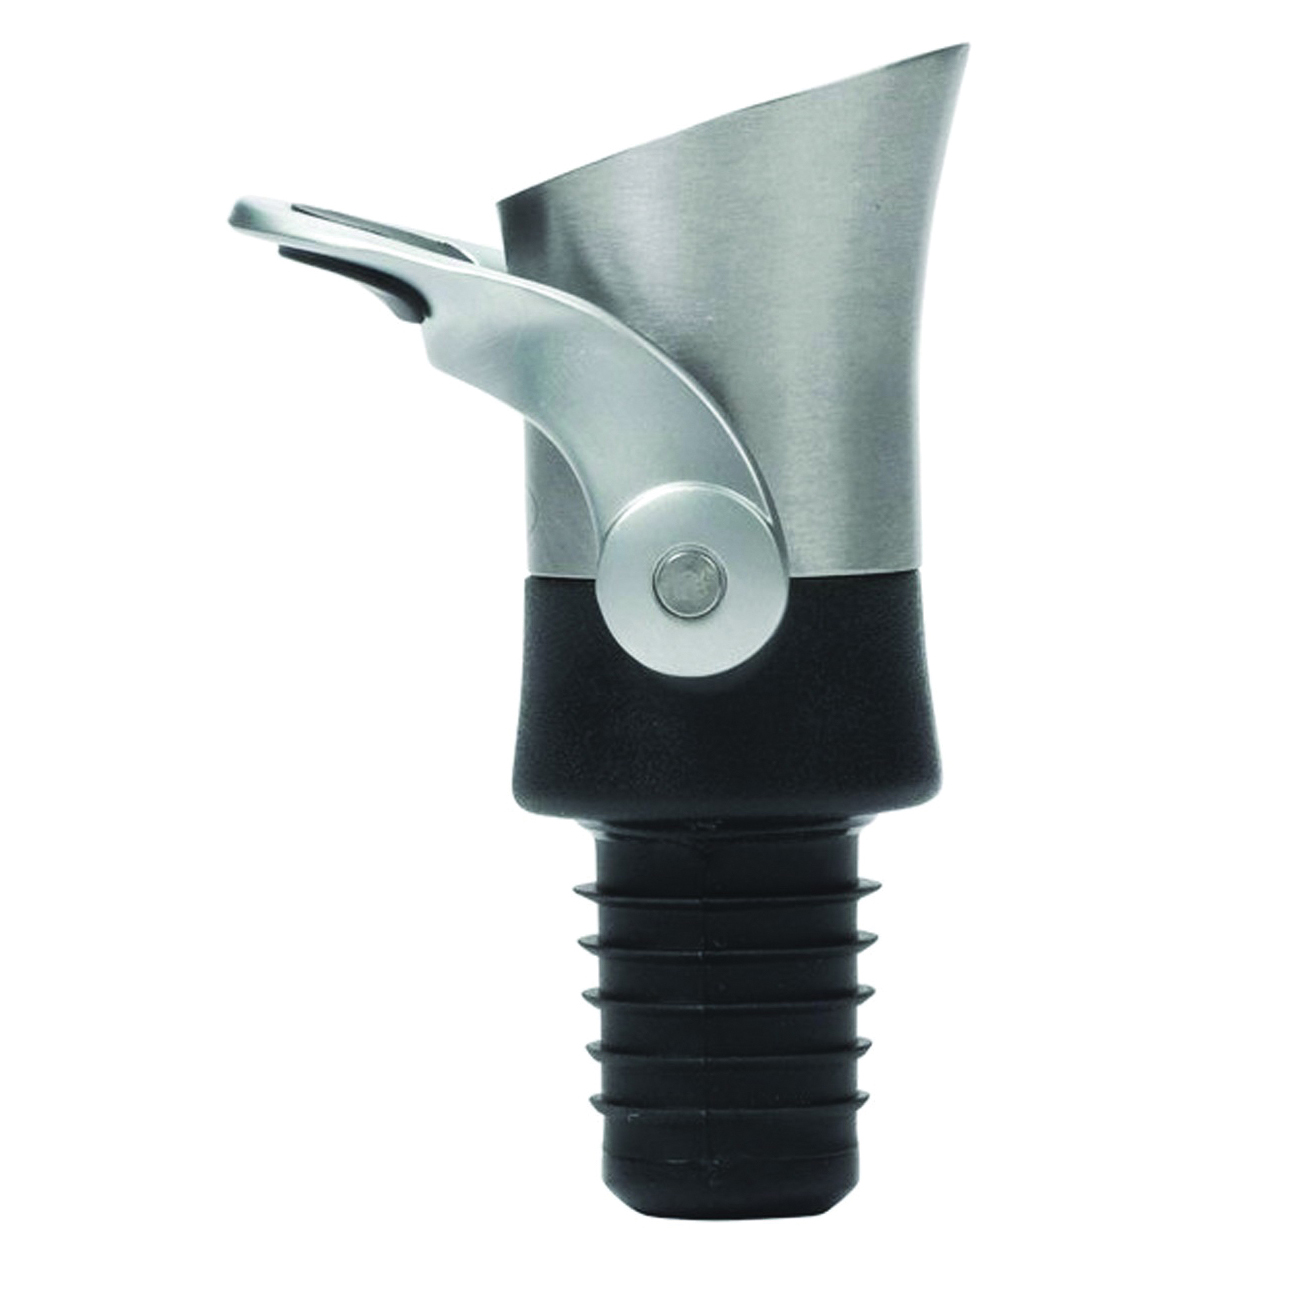 Good Grips 11136400V2 2-in-1 Wine Stopper and Pourer, Stainless Steel - 1